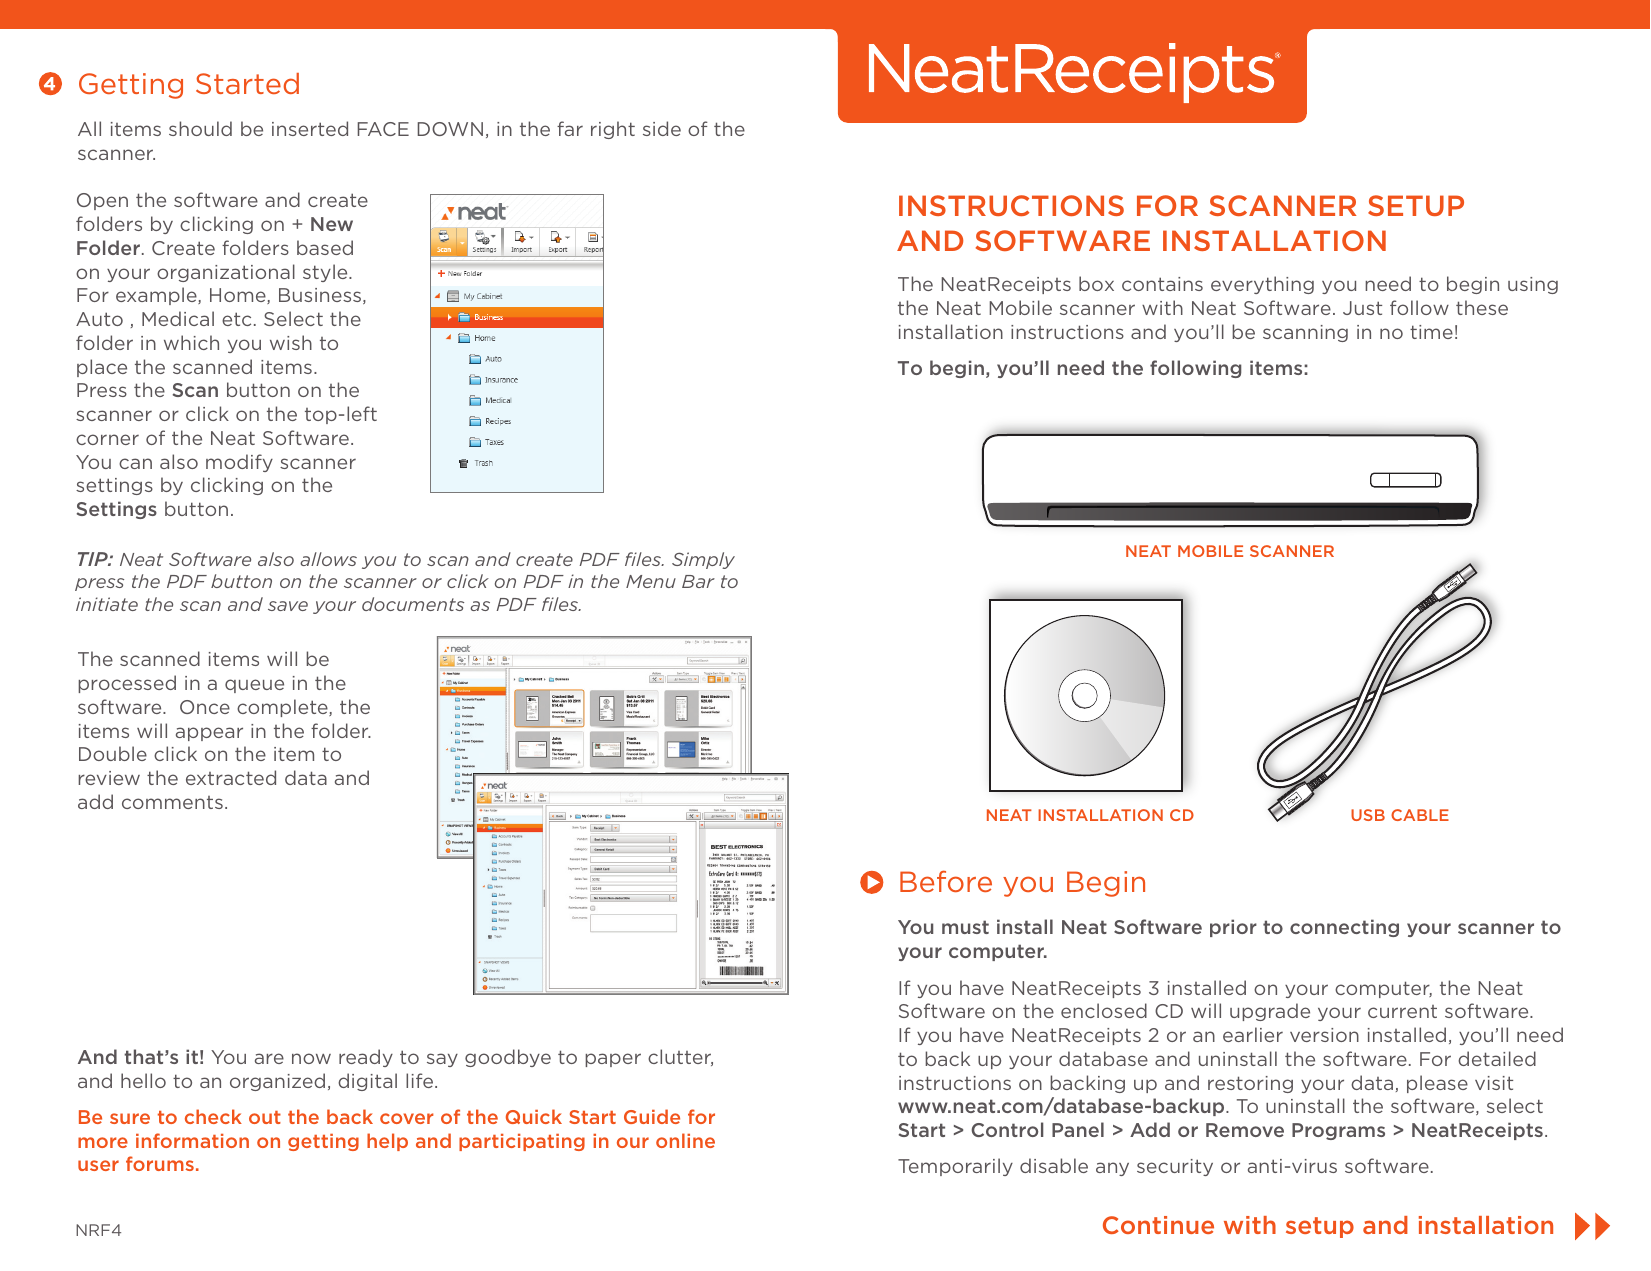 Page 1 of 2 - The-Neat-Company The-Neat-Company-Neat-Receipts-For-Mac-Mobile-Scanner-322-Users-Manual- NeatReceipts_Installation_Aug2011_1  The-neat-company-neat-receipts-for-mac-mobile-scanner-322-users-manual